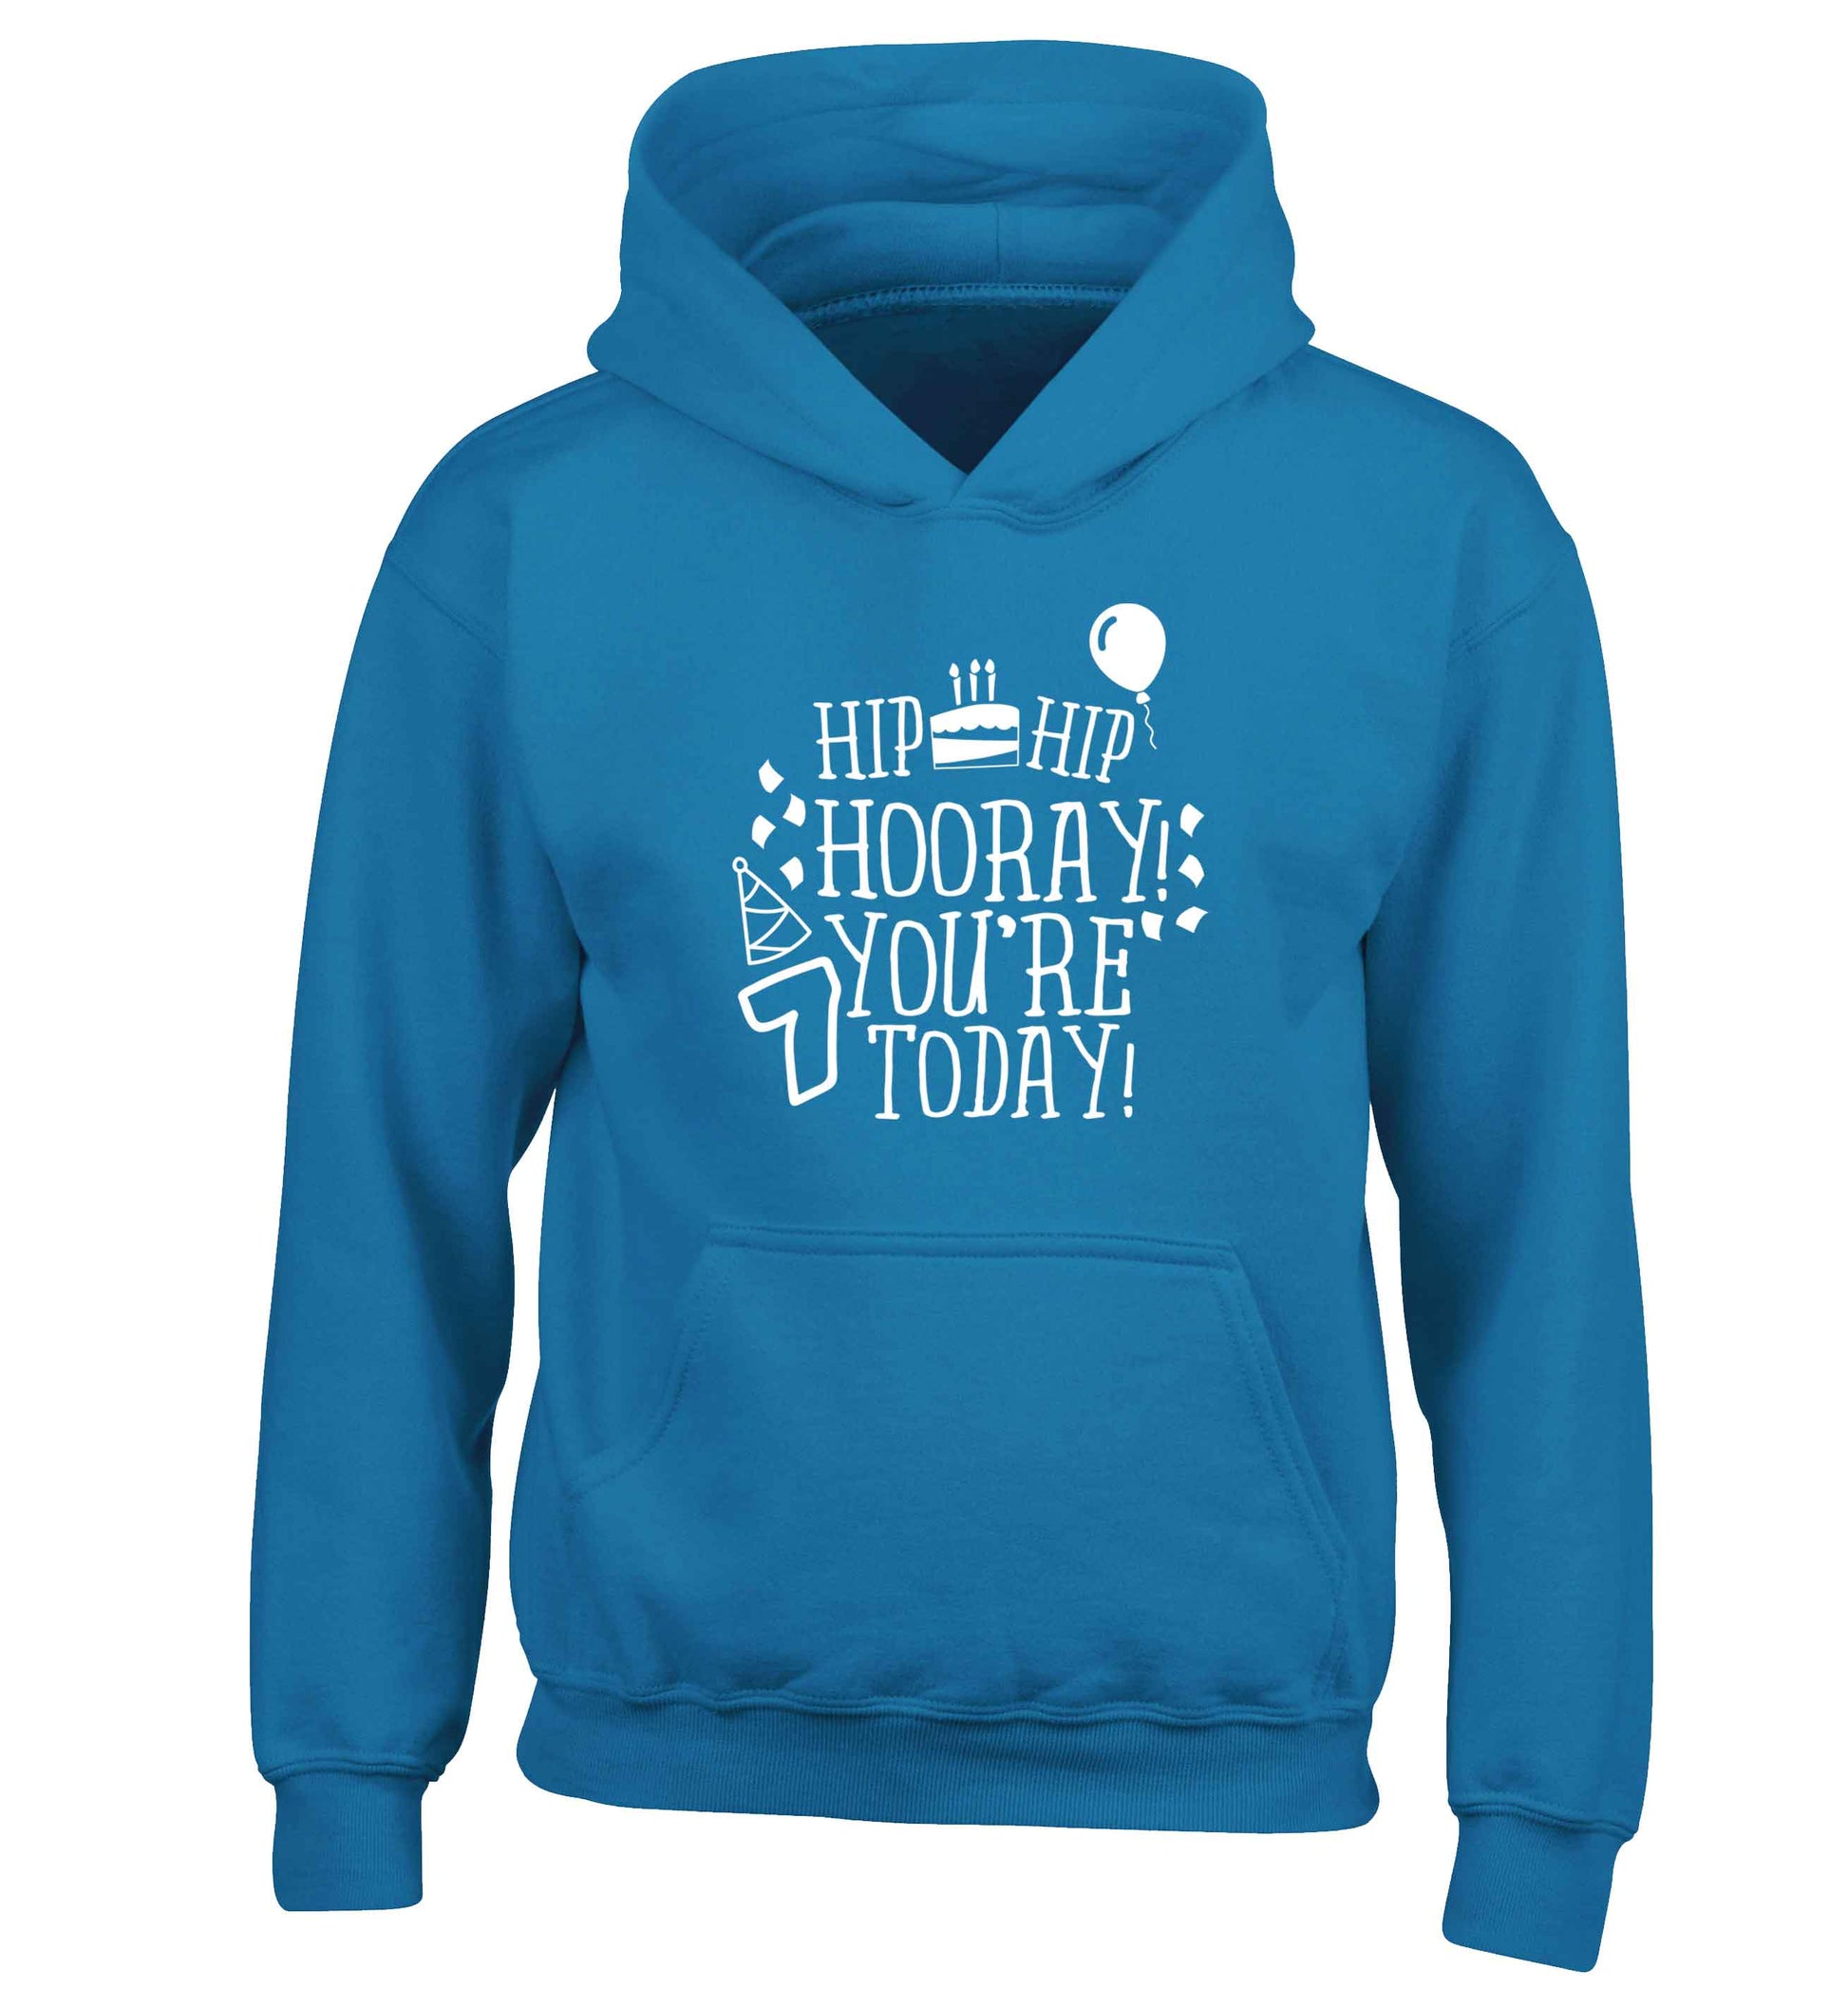 Hip hip hooray you're seven today! children's blue hoodie 12-13 Years